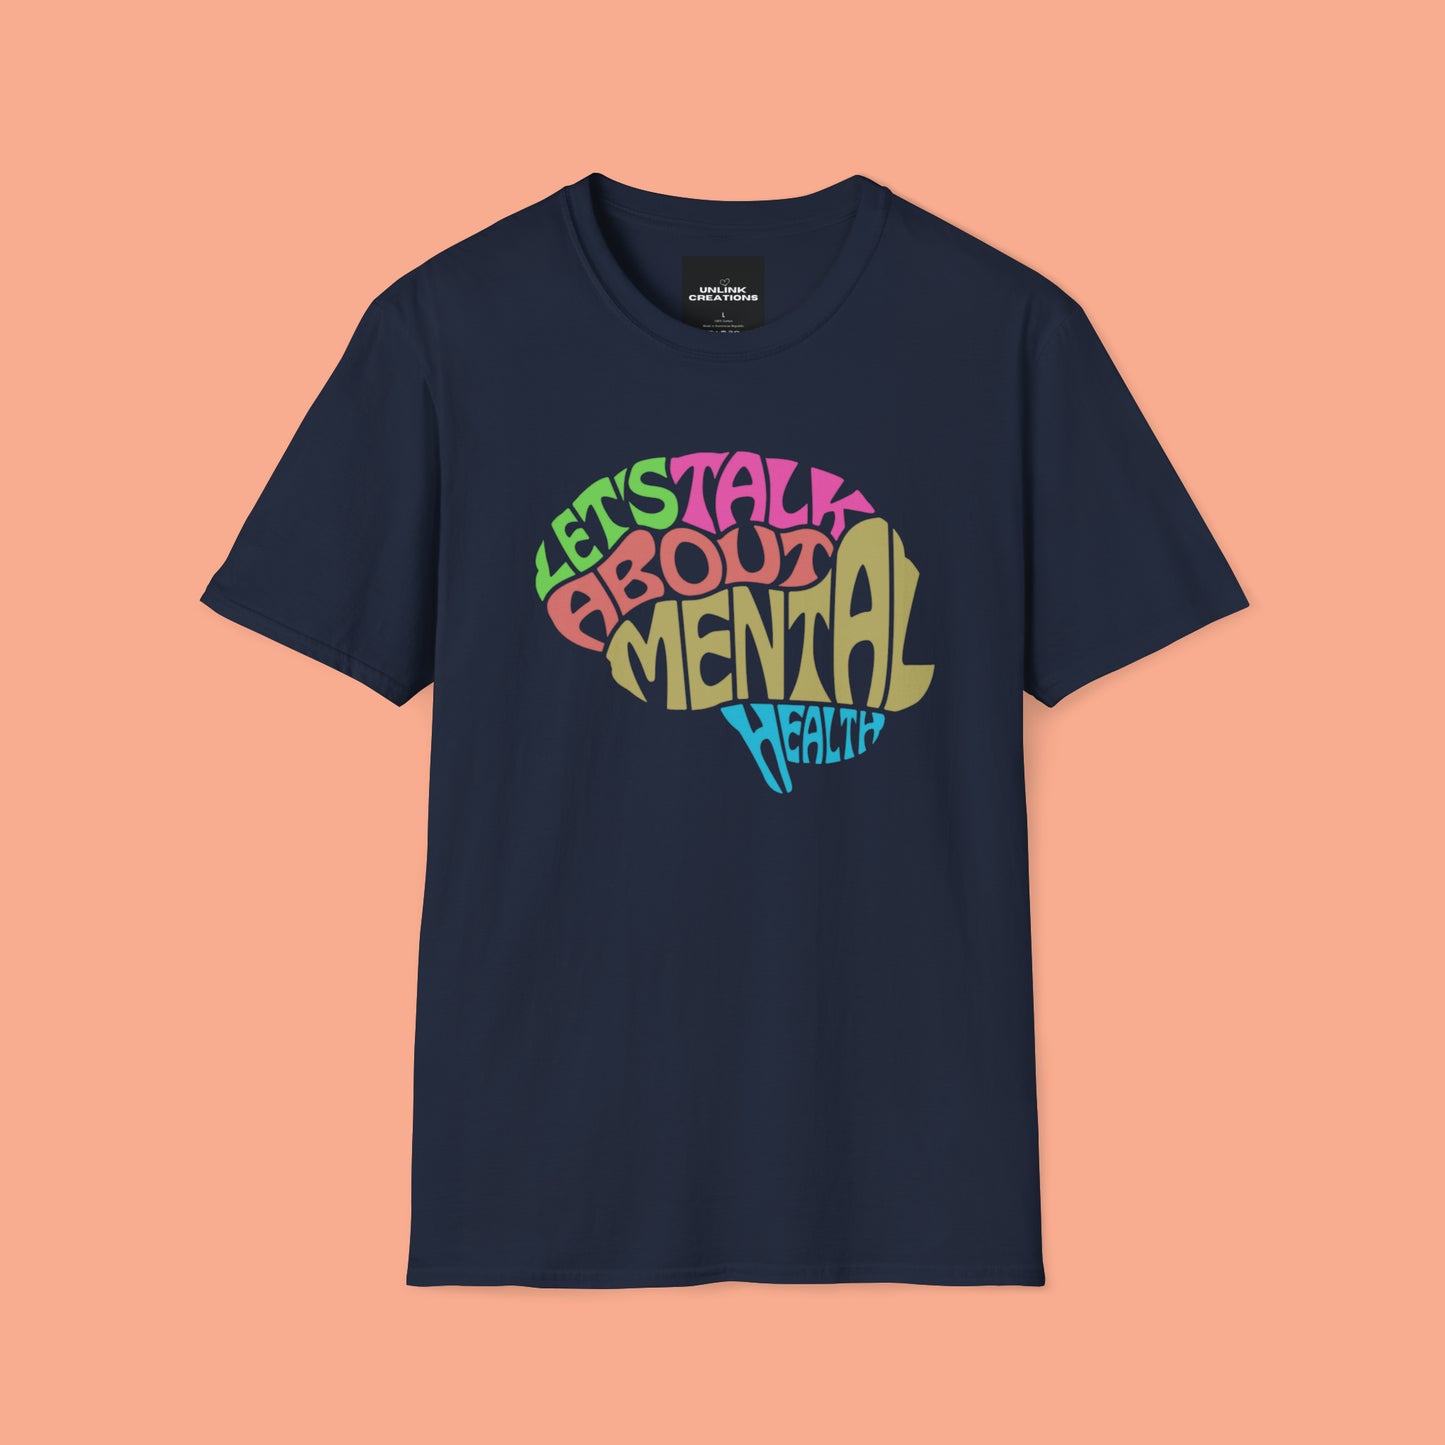 The CDC states "Mental health is important at every stage of life, from childhood and adolescence through adulthood.” I can’t agree more so “LET’S TALK ABOUT MENTAL HEALTH” is the message of this Unisex Softstyle T-Shirt design.